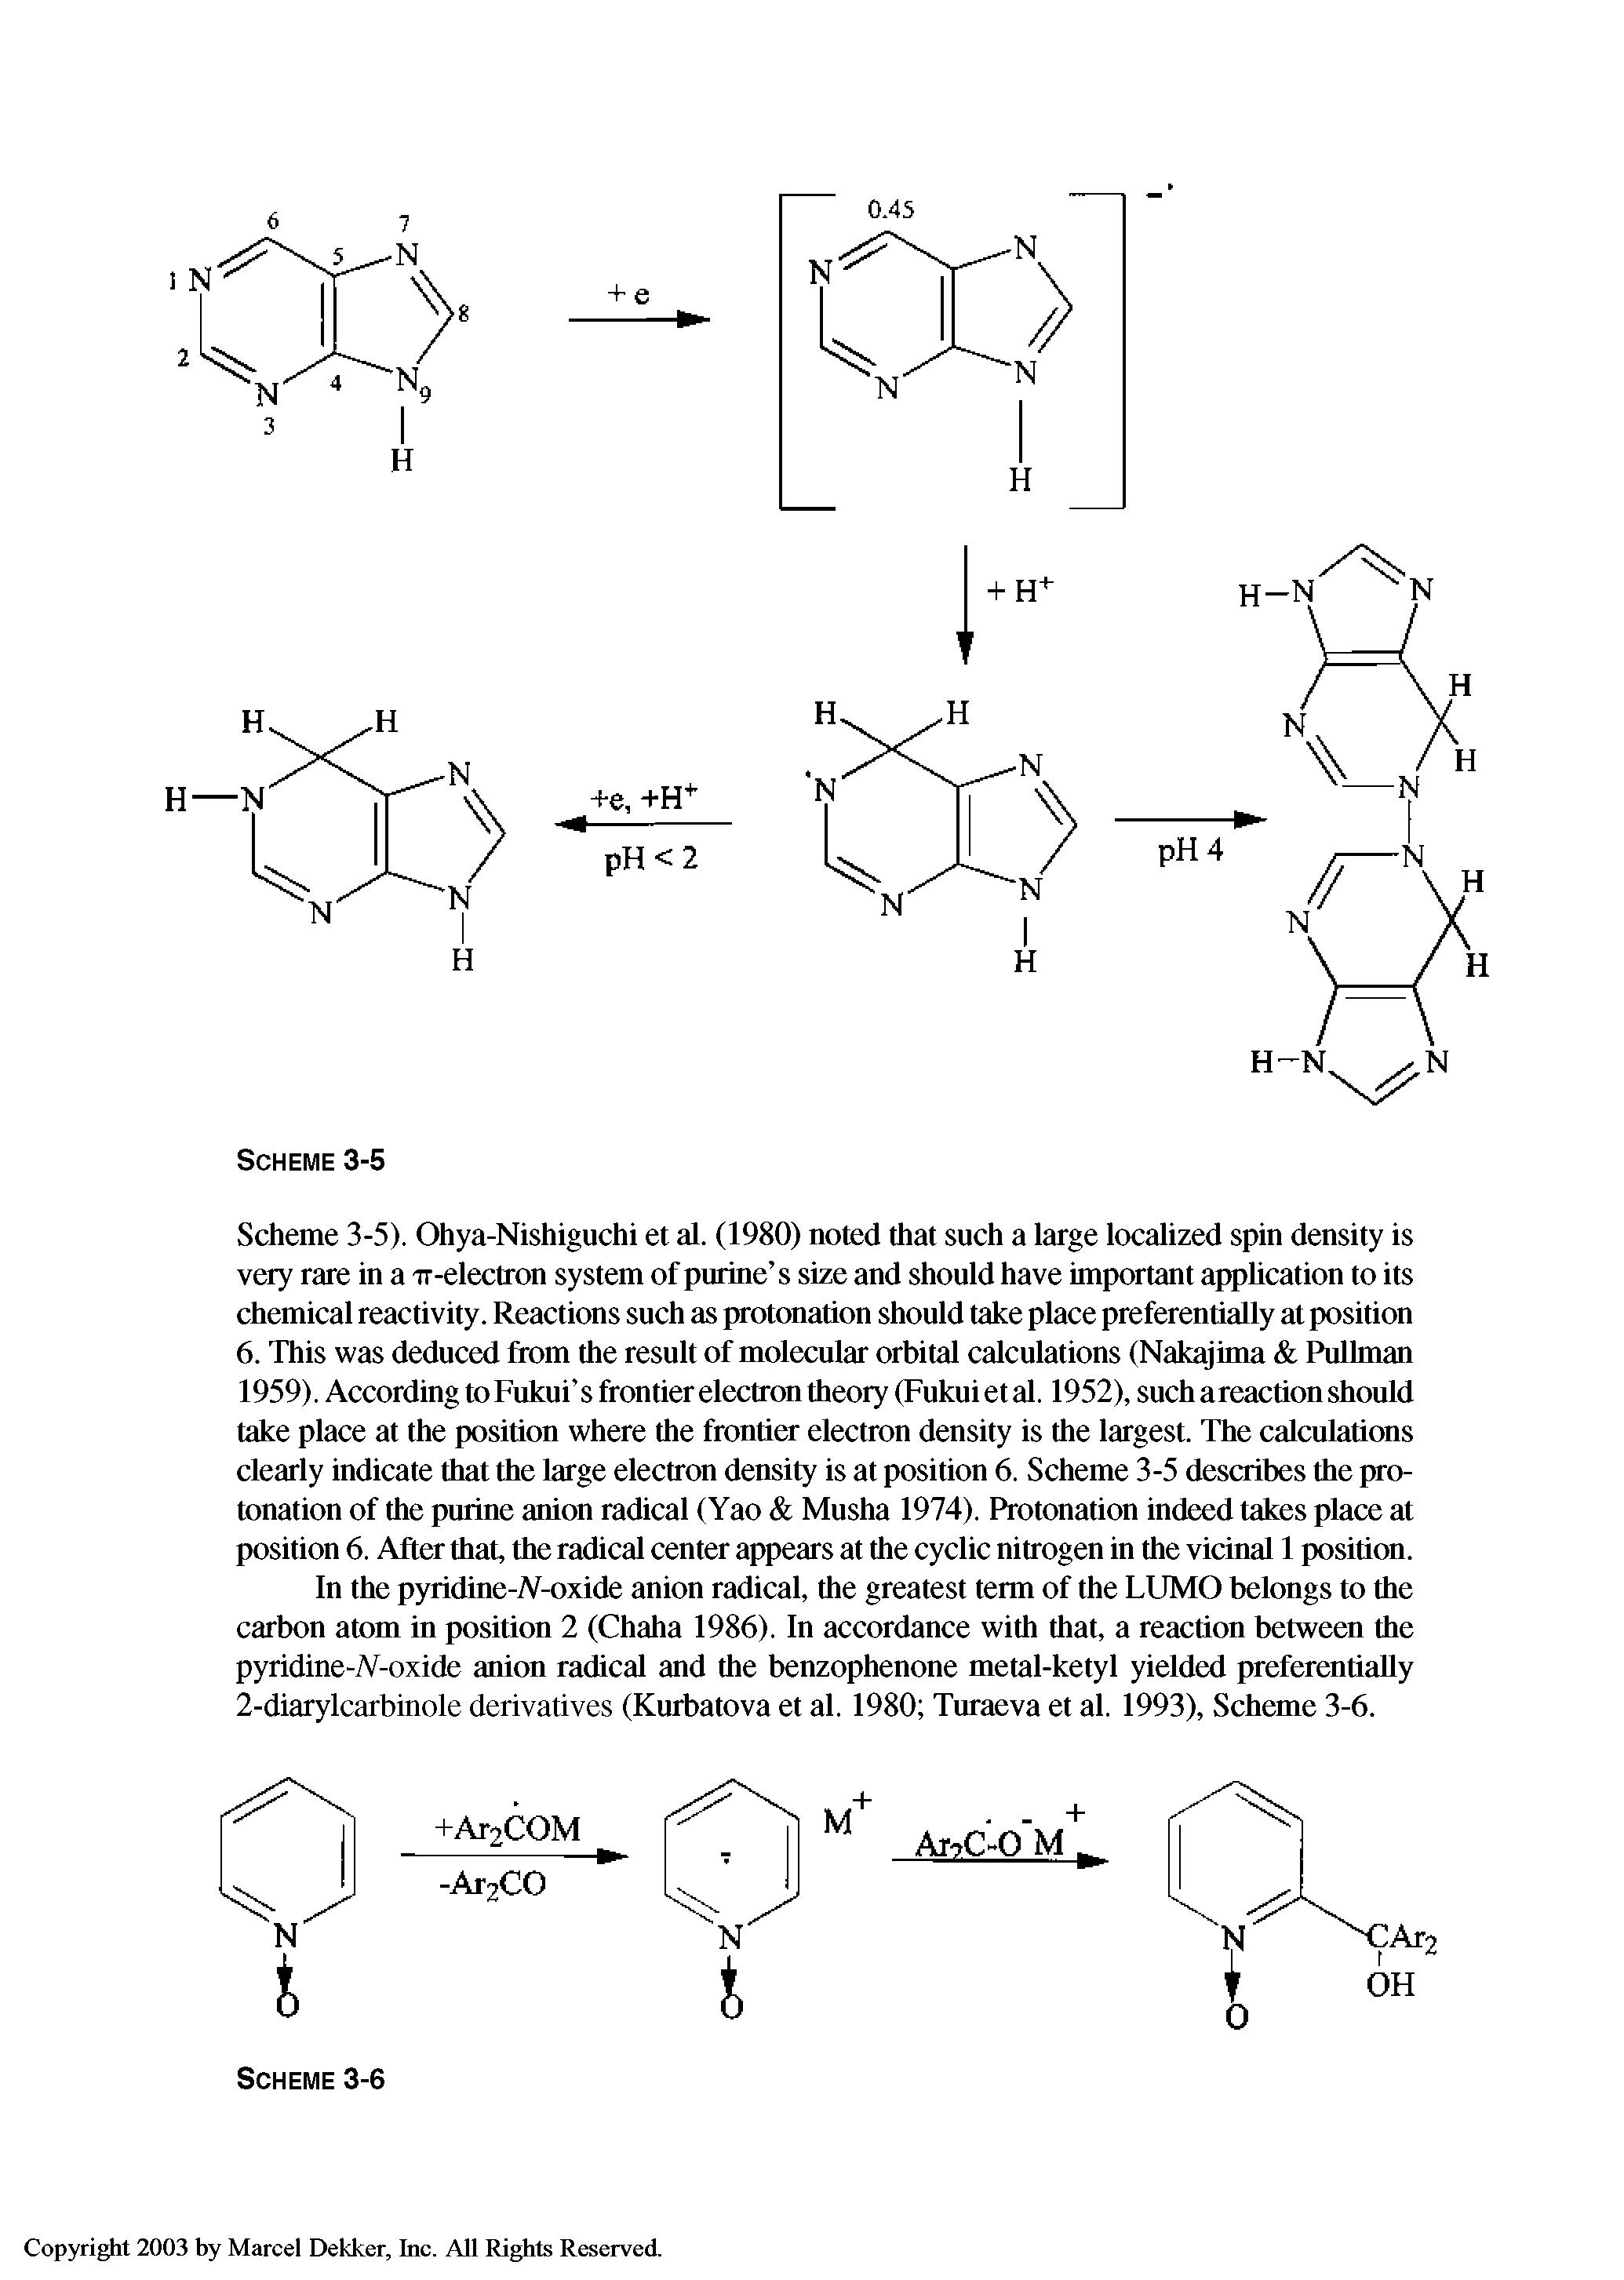 Scheme 3-5). Ohya-Nishiguchi et al. (1980) noted that such a large localized spin density is very rare in a ir-electron system of purine s size and should have important application to its chemical reactivity. Reactions such as protonation should take place preferentially at position 6. This was deduced from the result of molecular orbital calculations (Nakajima Pullman 1959). According to Fukui s frontier electron theory (Fukui et al. 1952), such areaction should take place at the position where the frontier electron density is the largest. The calculations clearly indicate that the large electron density is at position 6. Scheme 3-5 describes the protonation of the purine anion radical (Yao Musha 1974). Protonation indeed takes place at position 6. After that, the radical center appears at the cyclic nitrogen in the vicinal 1 position.